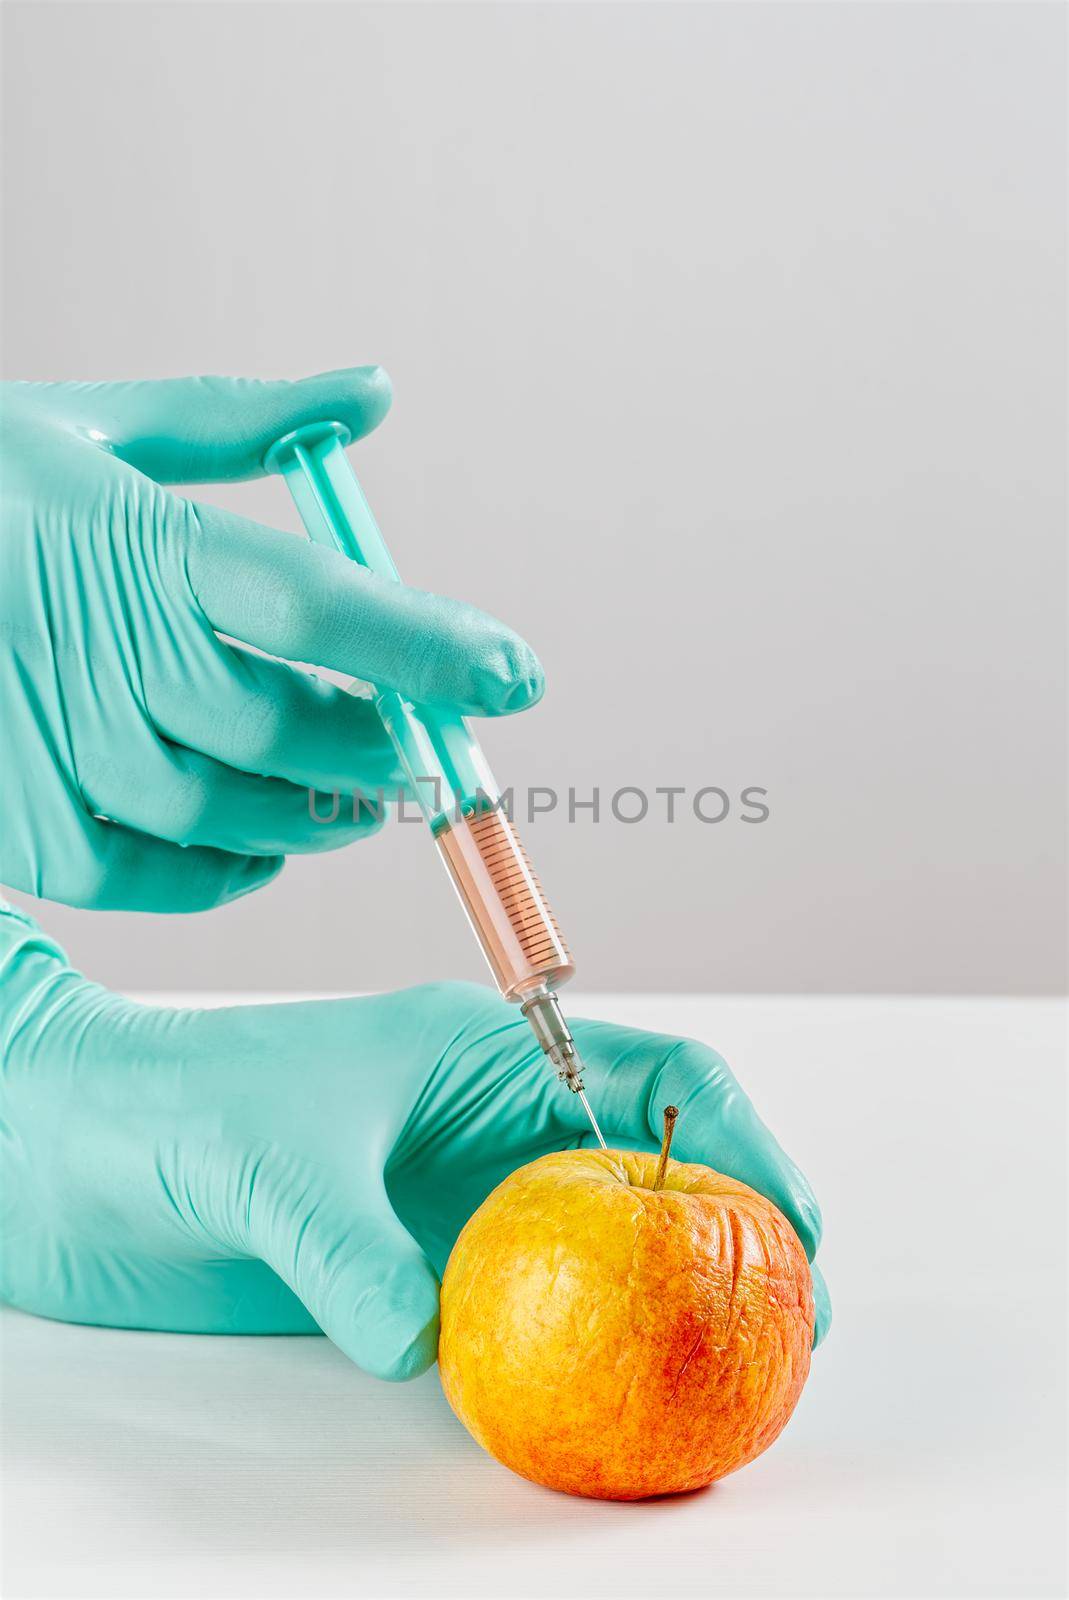 A hand in a medical glove inserts a syringe into apple. Harmful food additives. GMOs Concept. Injecting on apple at laboratory. Fruit genetic modification concept.